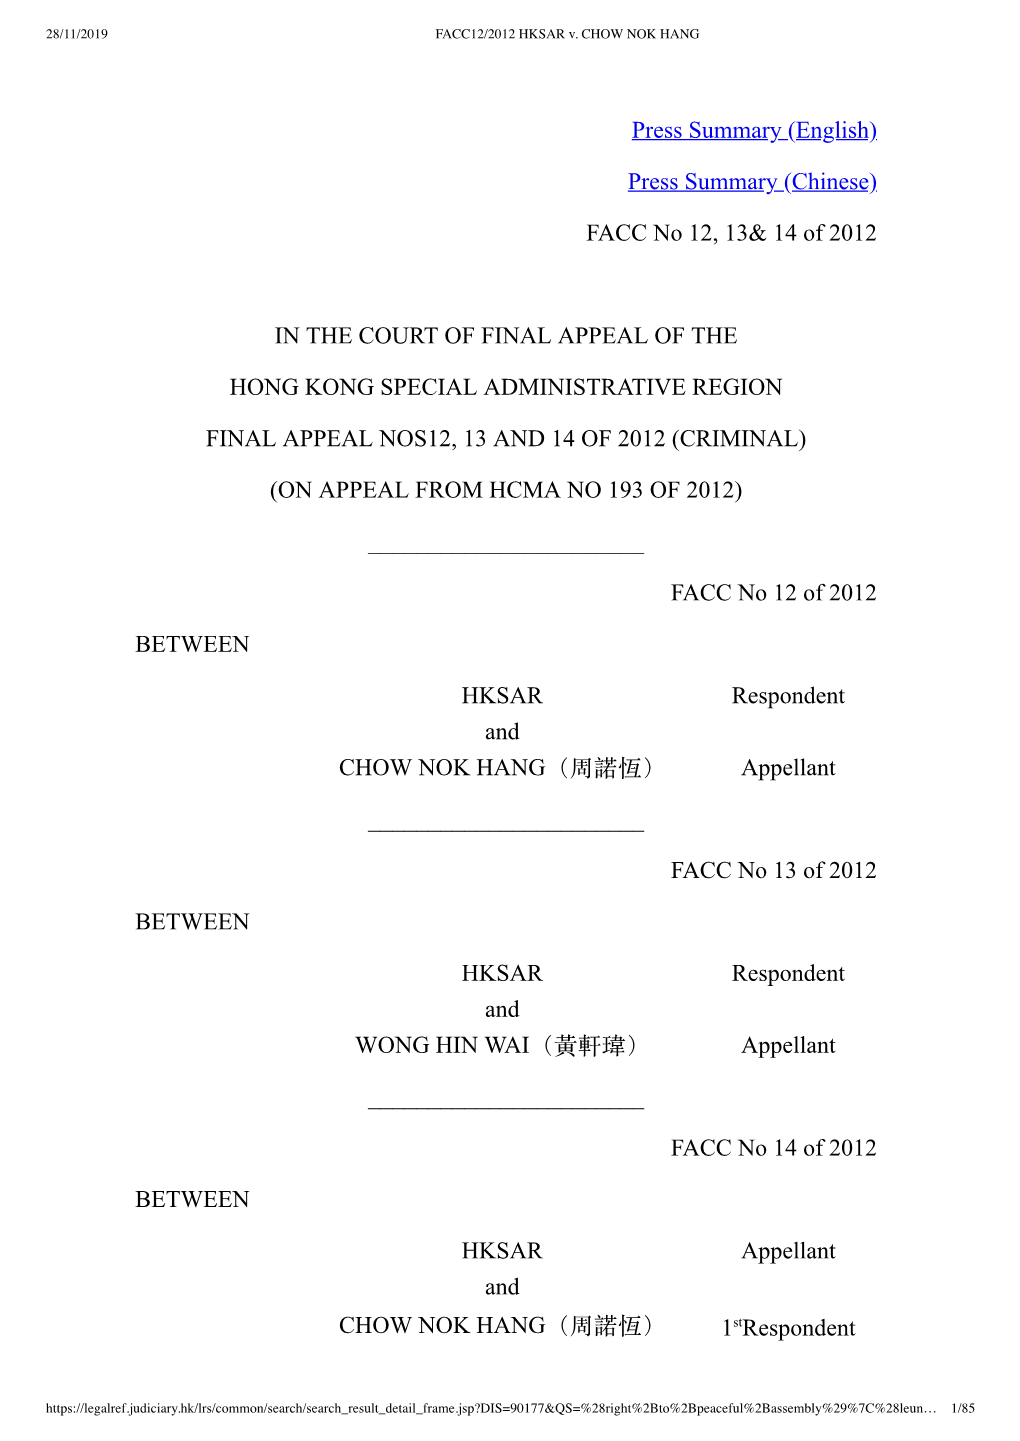 FACC No 12, 13& 14 of 2012 in the COURT of FINAL APPEAL of THE